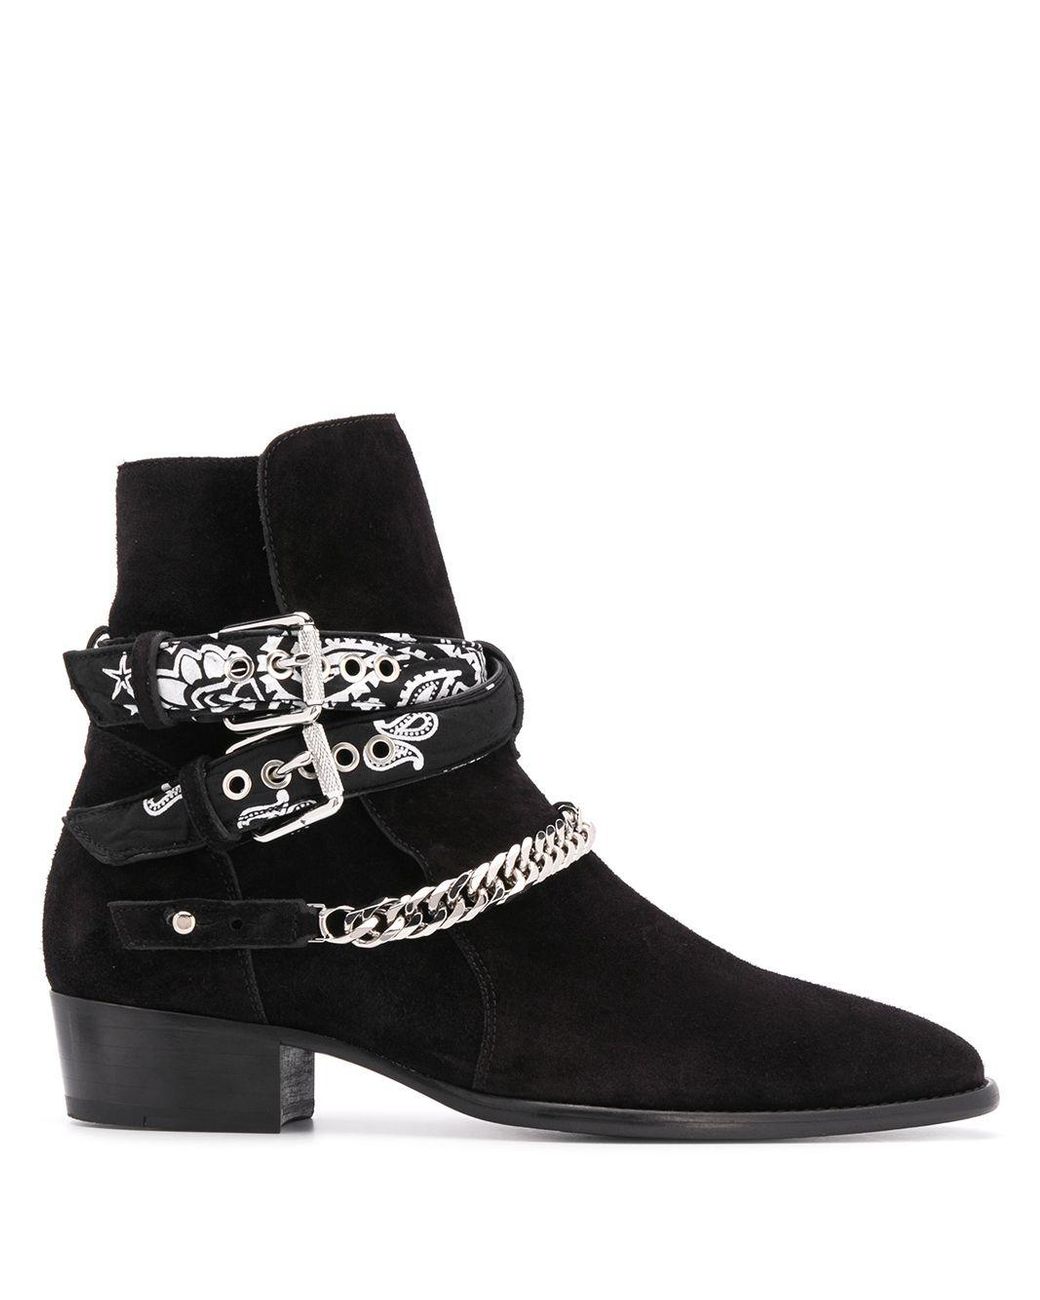 Amiri Ankle Boot With Buckles in Black for Men - Lyst